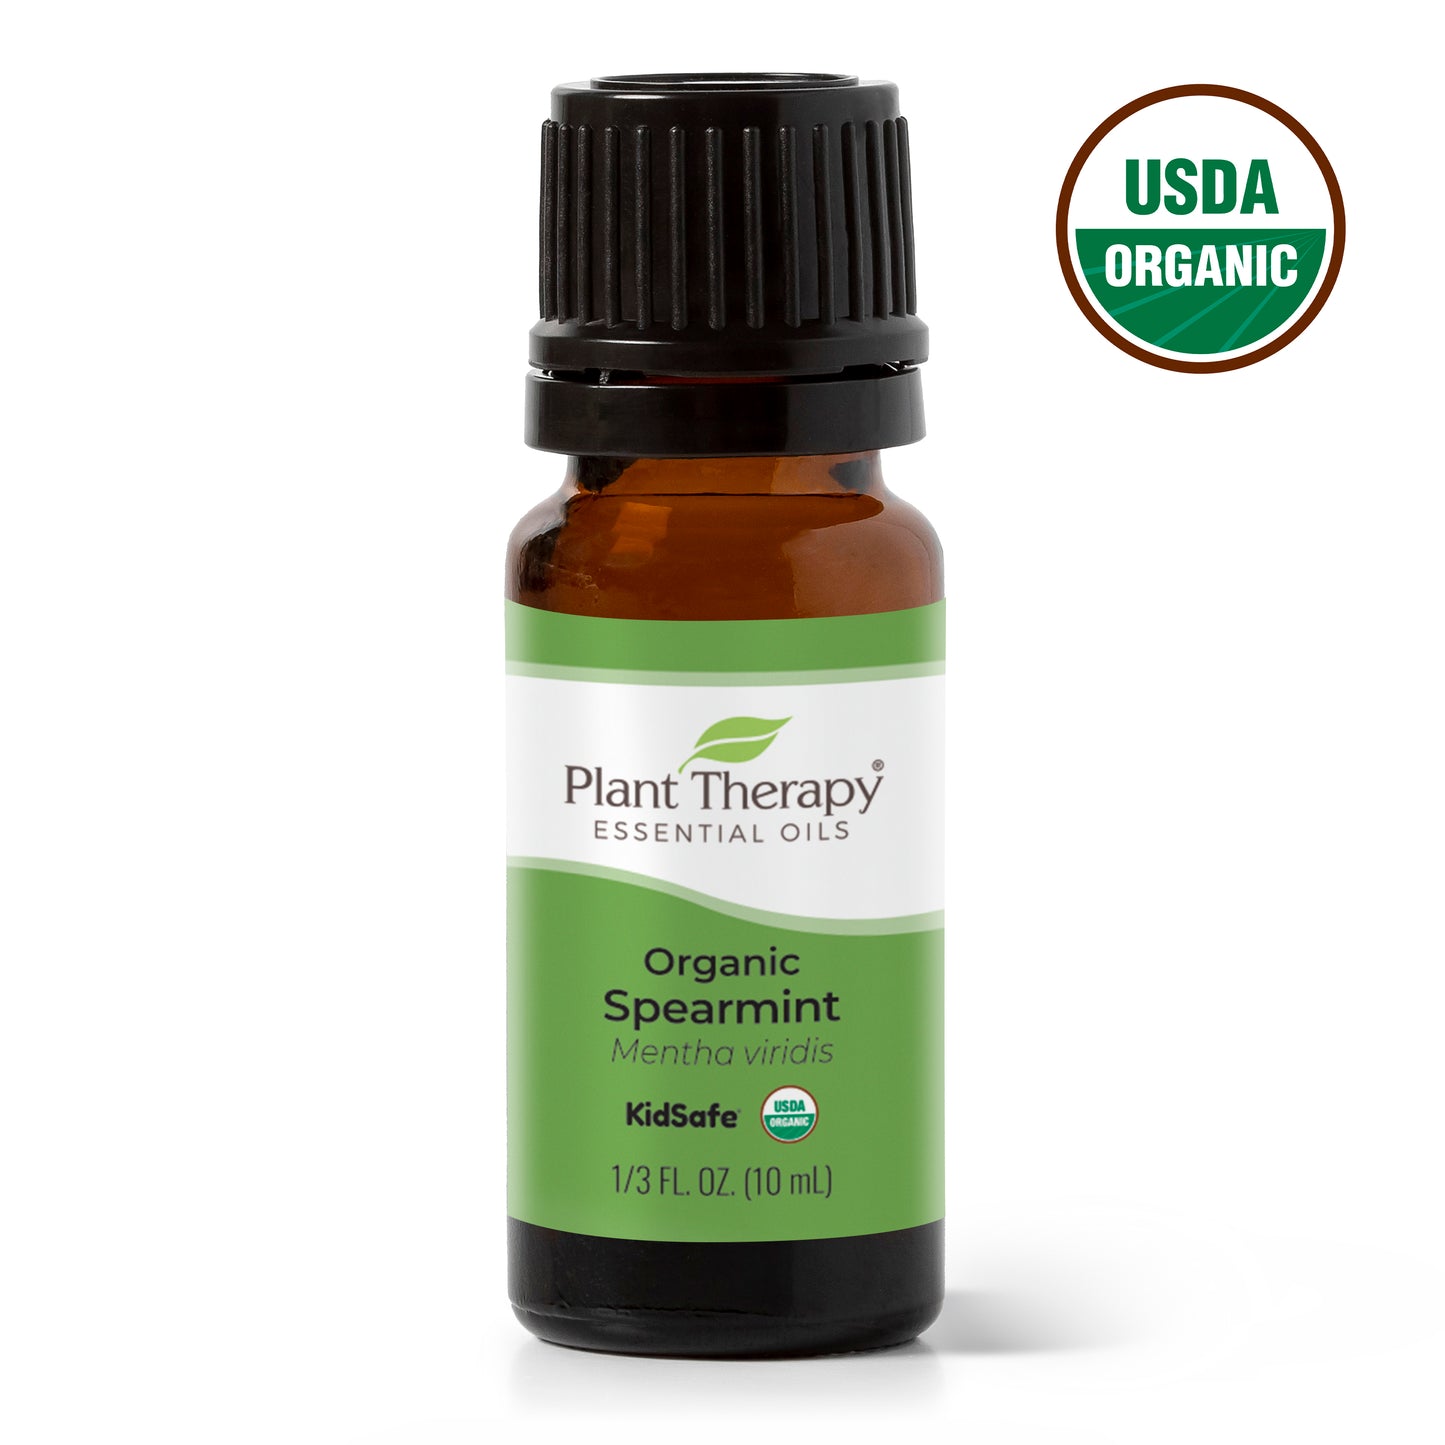 Plant Therapy Spearmint Organic Essential Oil 10 ml